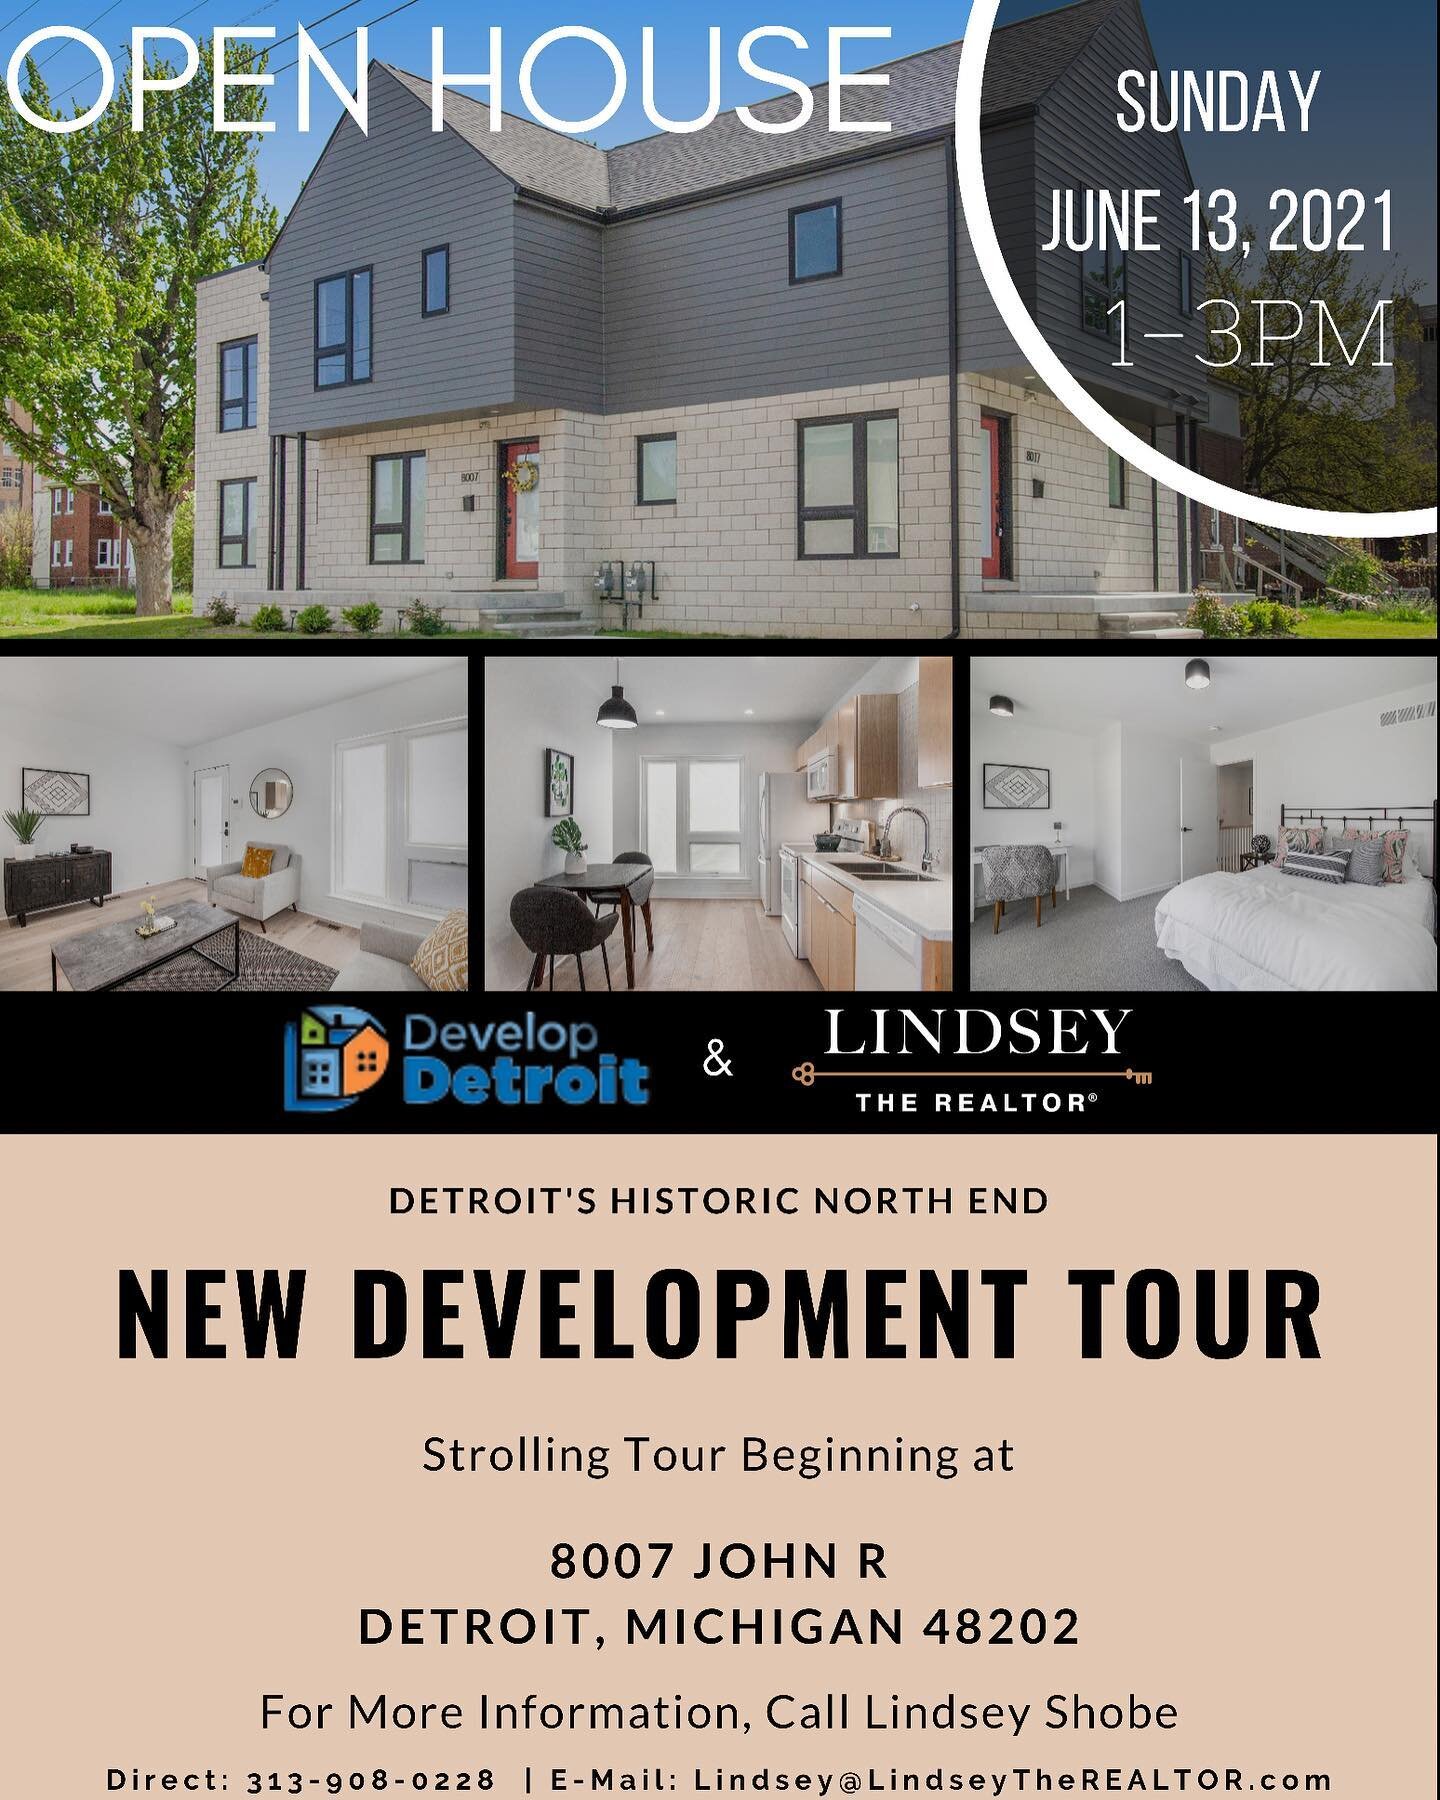 Hey guys! I know it&rsquo;s been a little bit. But, you&rsquo;ve all been keeping me busy!

Hopping back on to share some exciting news about an awesome new development in Detroit&rsquo;s North End!

Join me and my partners at Develop Detroit on Sund